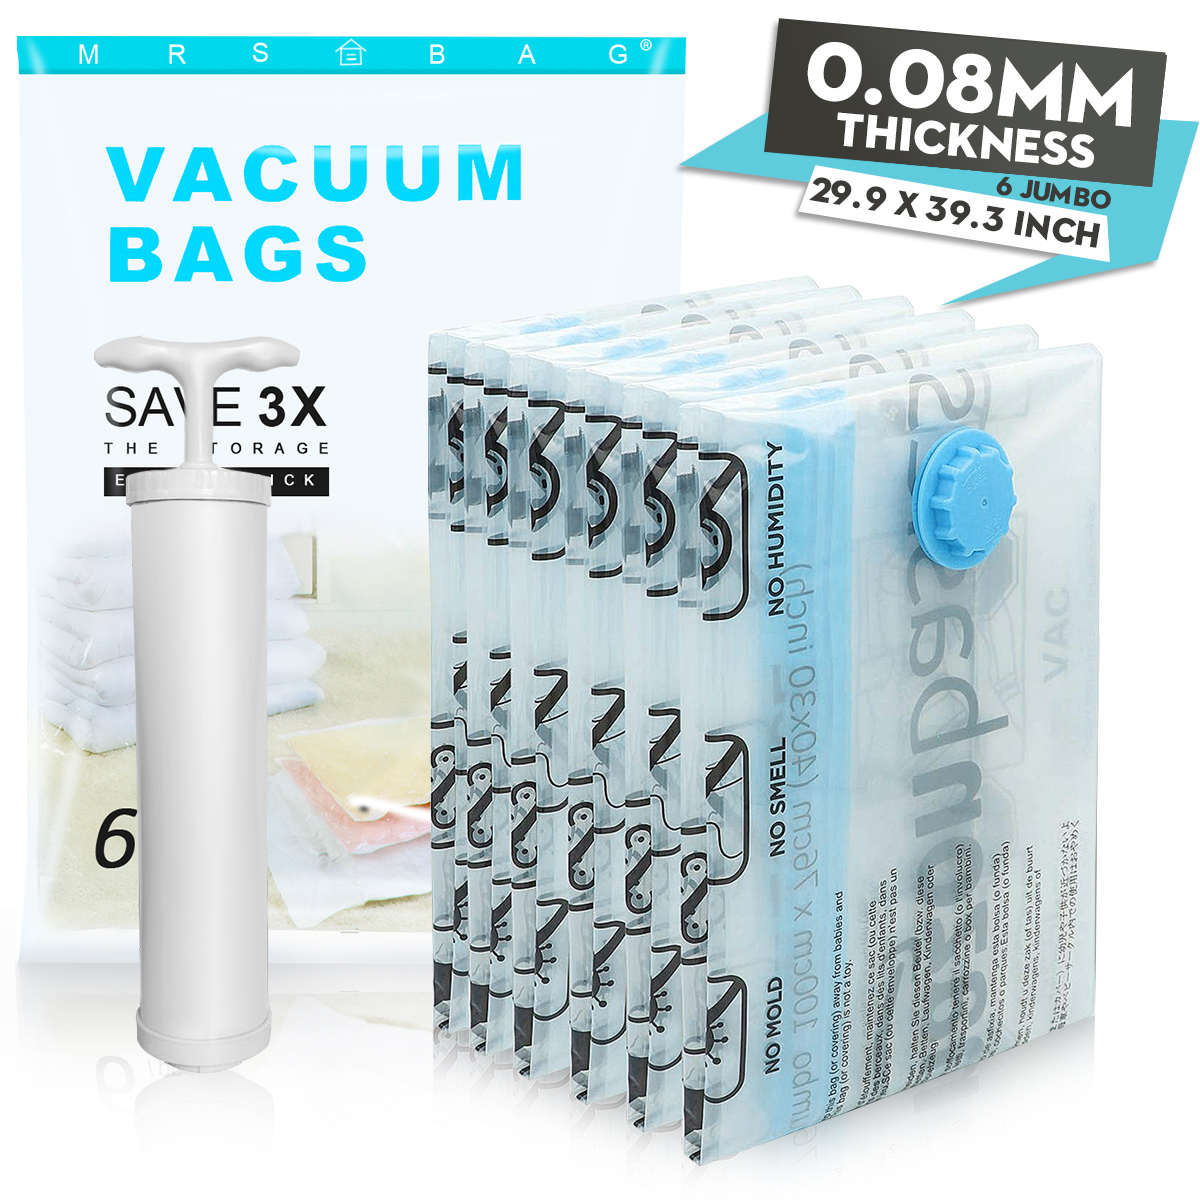 6PC-Vacuum-Bag-Seal-Compressed-Travel-Storage-Bag-Home-Organizer-Foldable-Clothes-Bag-With-Hand-Pump-1627763-2